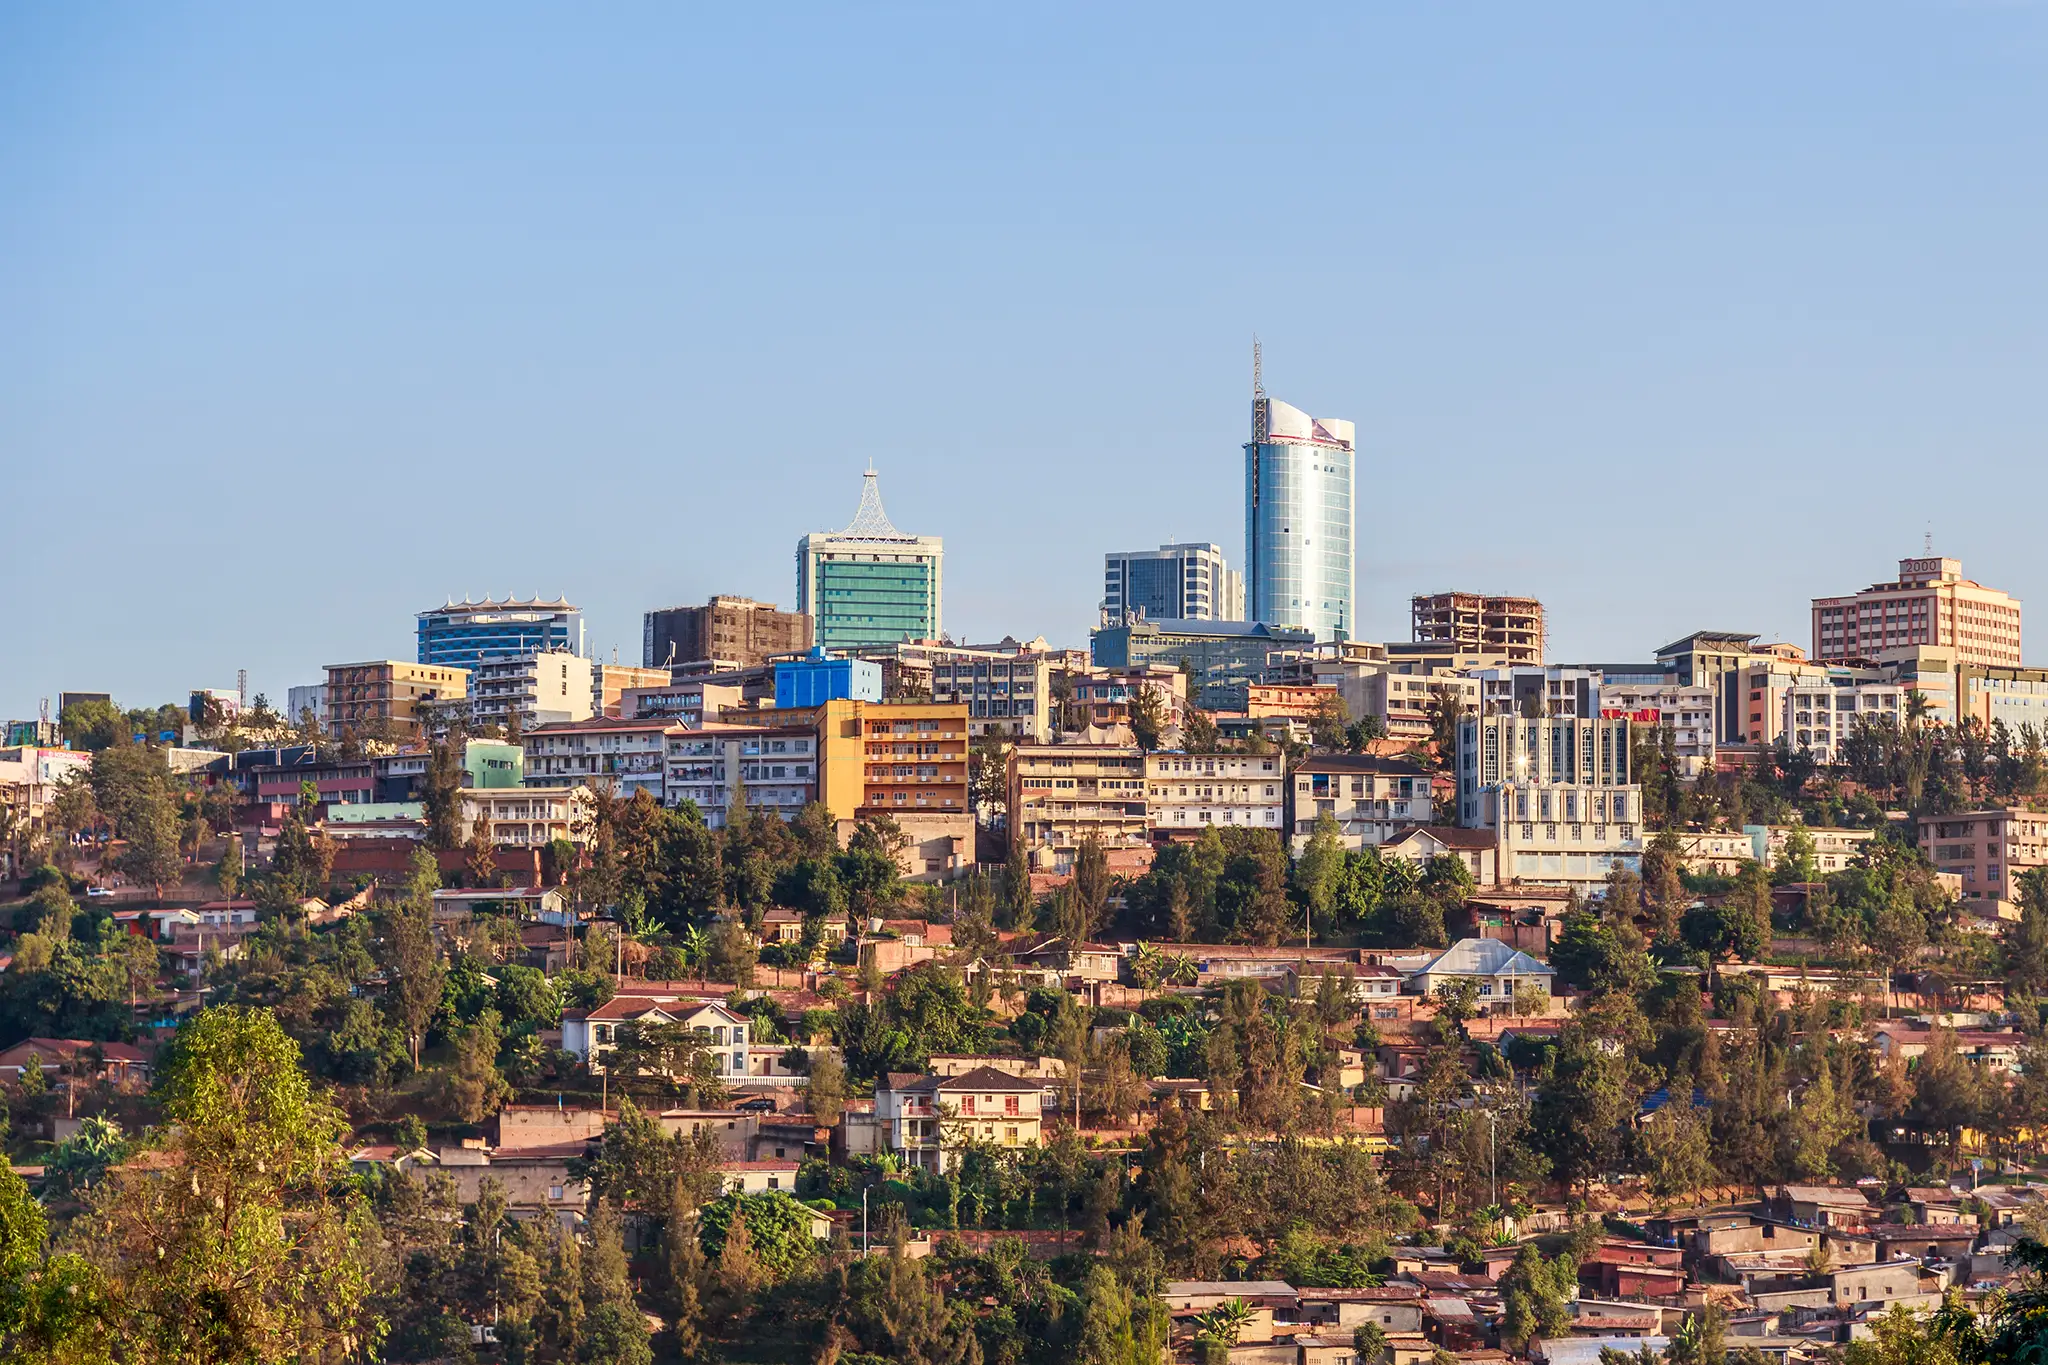 Panoramic view at the city bussiness district of Kigali, Rwanda.